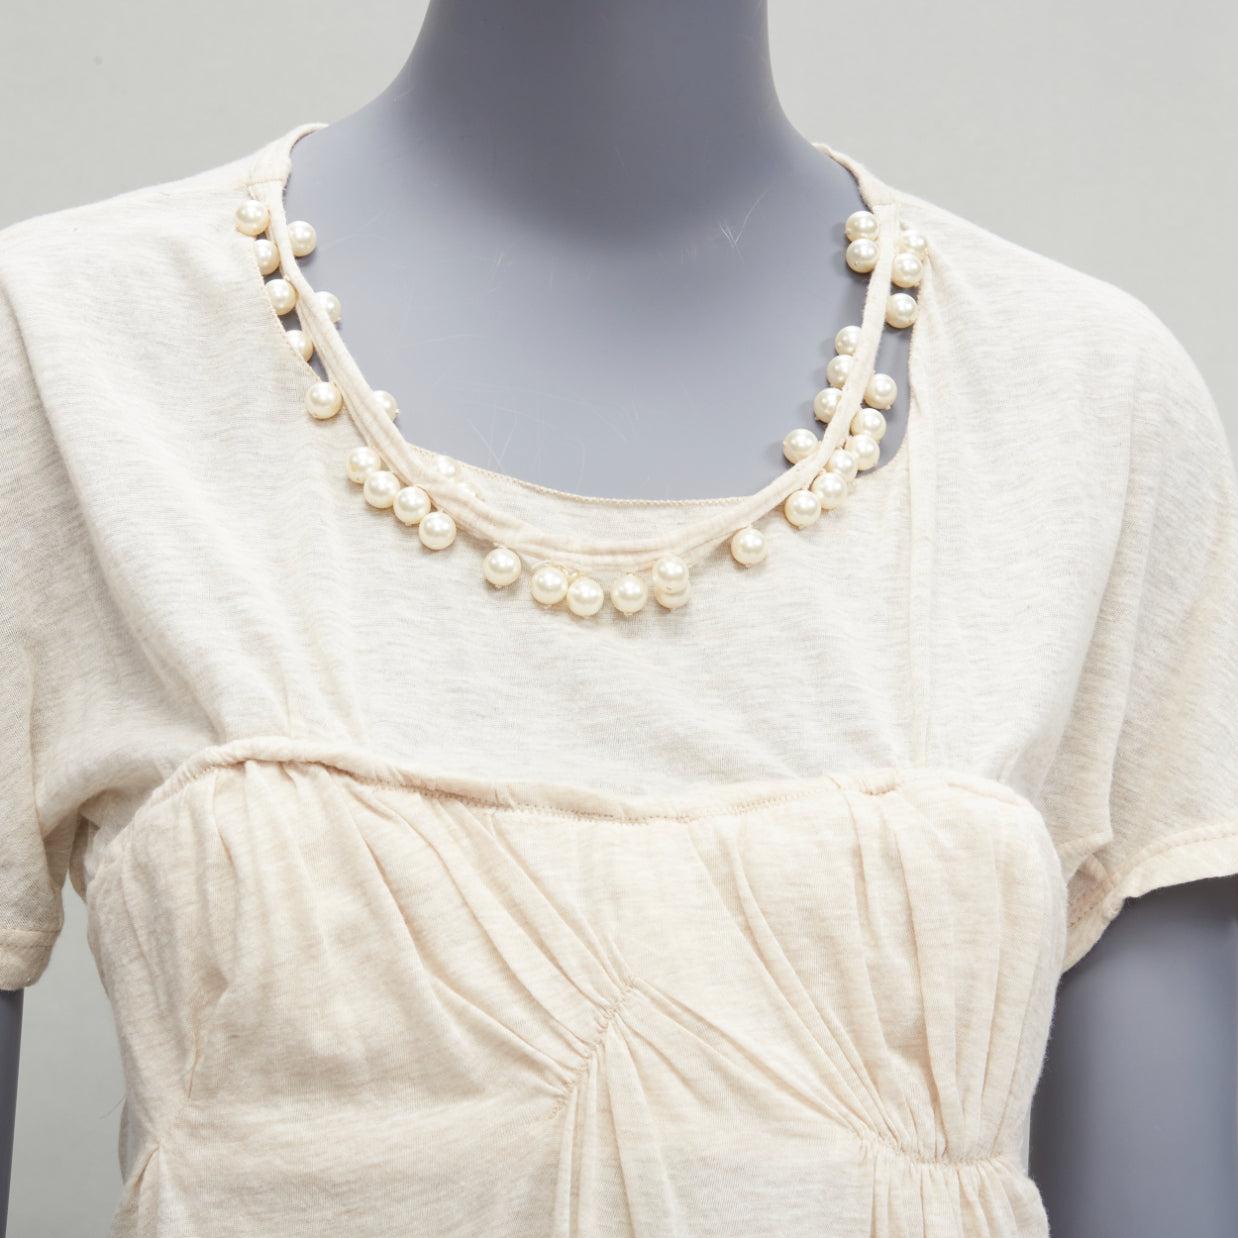 LOUIS VUITTON Marc Jacobs beige detached pearl necklace cupped bust tshirt FR38 M
Reference: VACN/A00043
Brand: Louis Vuitton
Designer: Marc Jacobs
Material: Feels like cotton
Color: Beige
Pattern: Solid
Closure: Tie Neck
Extra Details: Tie back